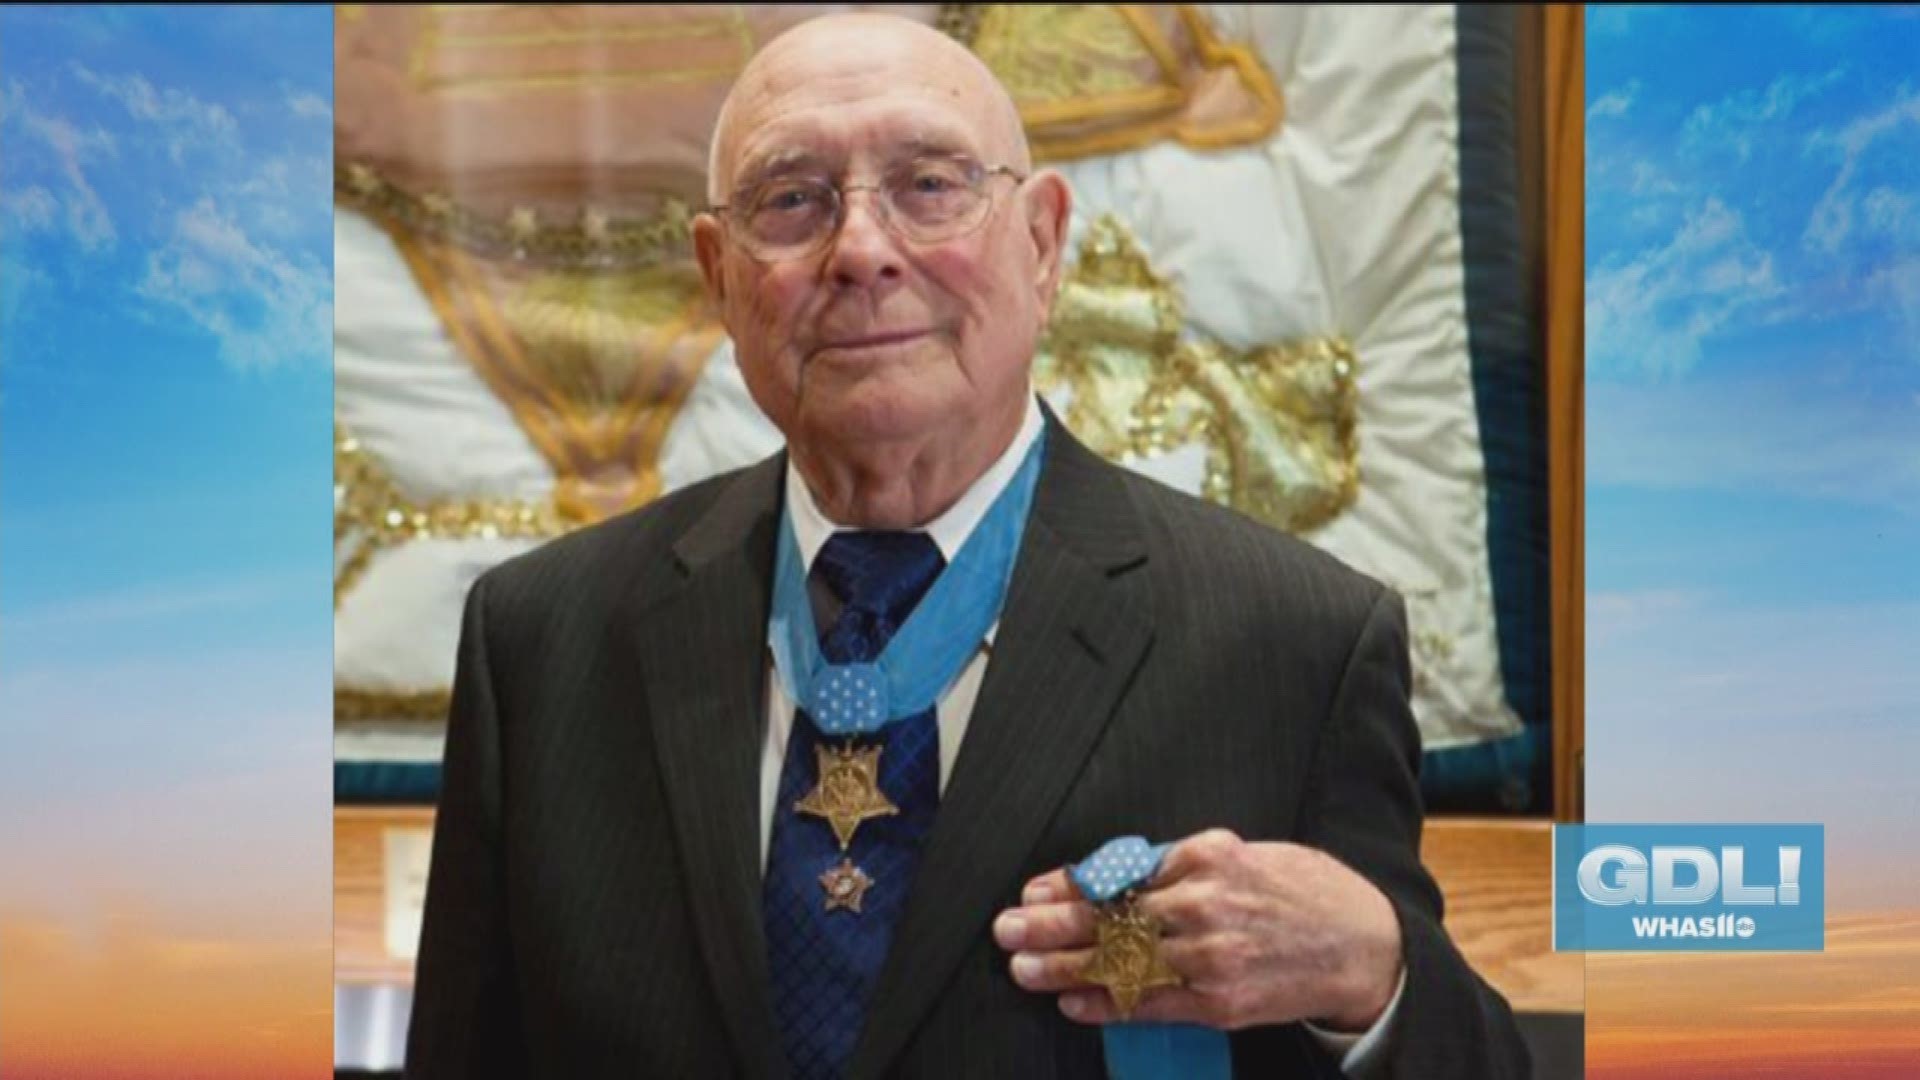 Hershel "Woody" Williams earned his Medal of Honor back in 1945. Great Day Live would like to congratulate and thank him and all the other Medal of Honor recipients for their brave work protecting and fighting for our country.